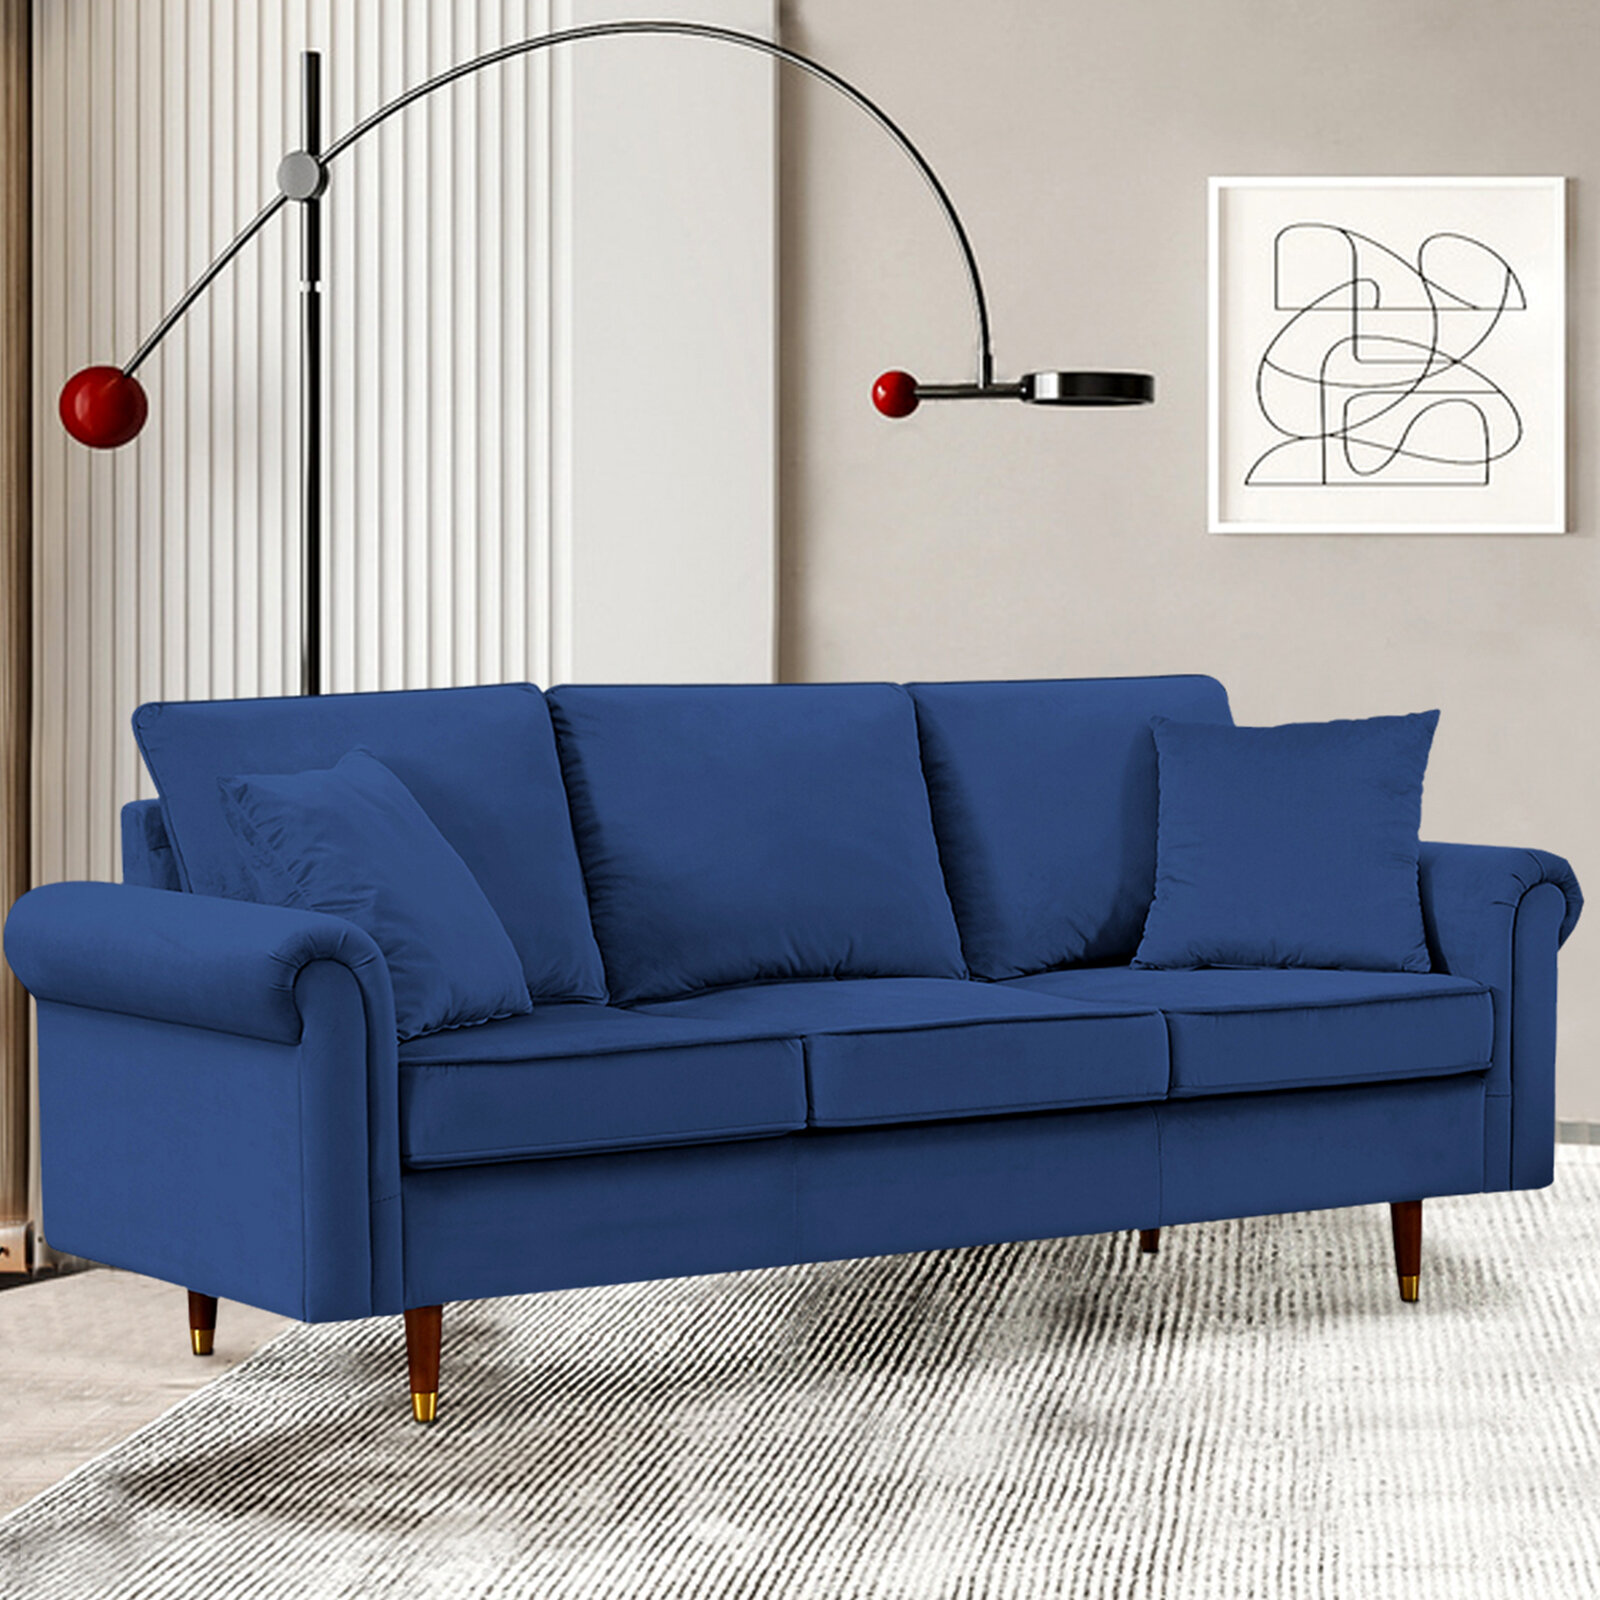 Dark Blue Couch with Bolster Pillows Modern Living Room Fabric Sofa